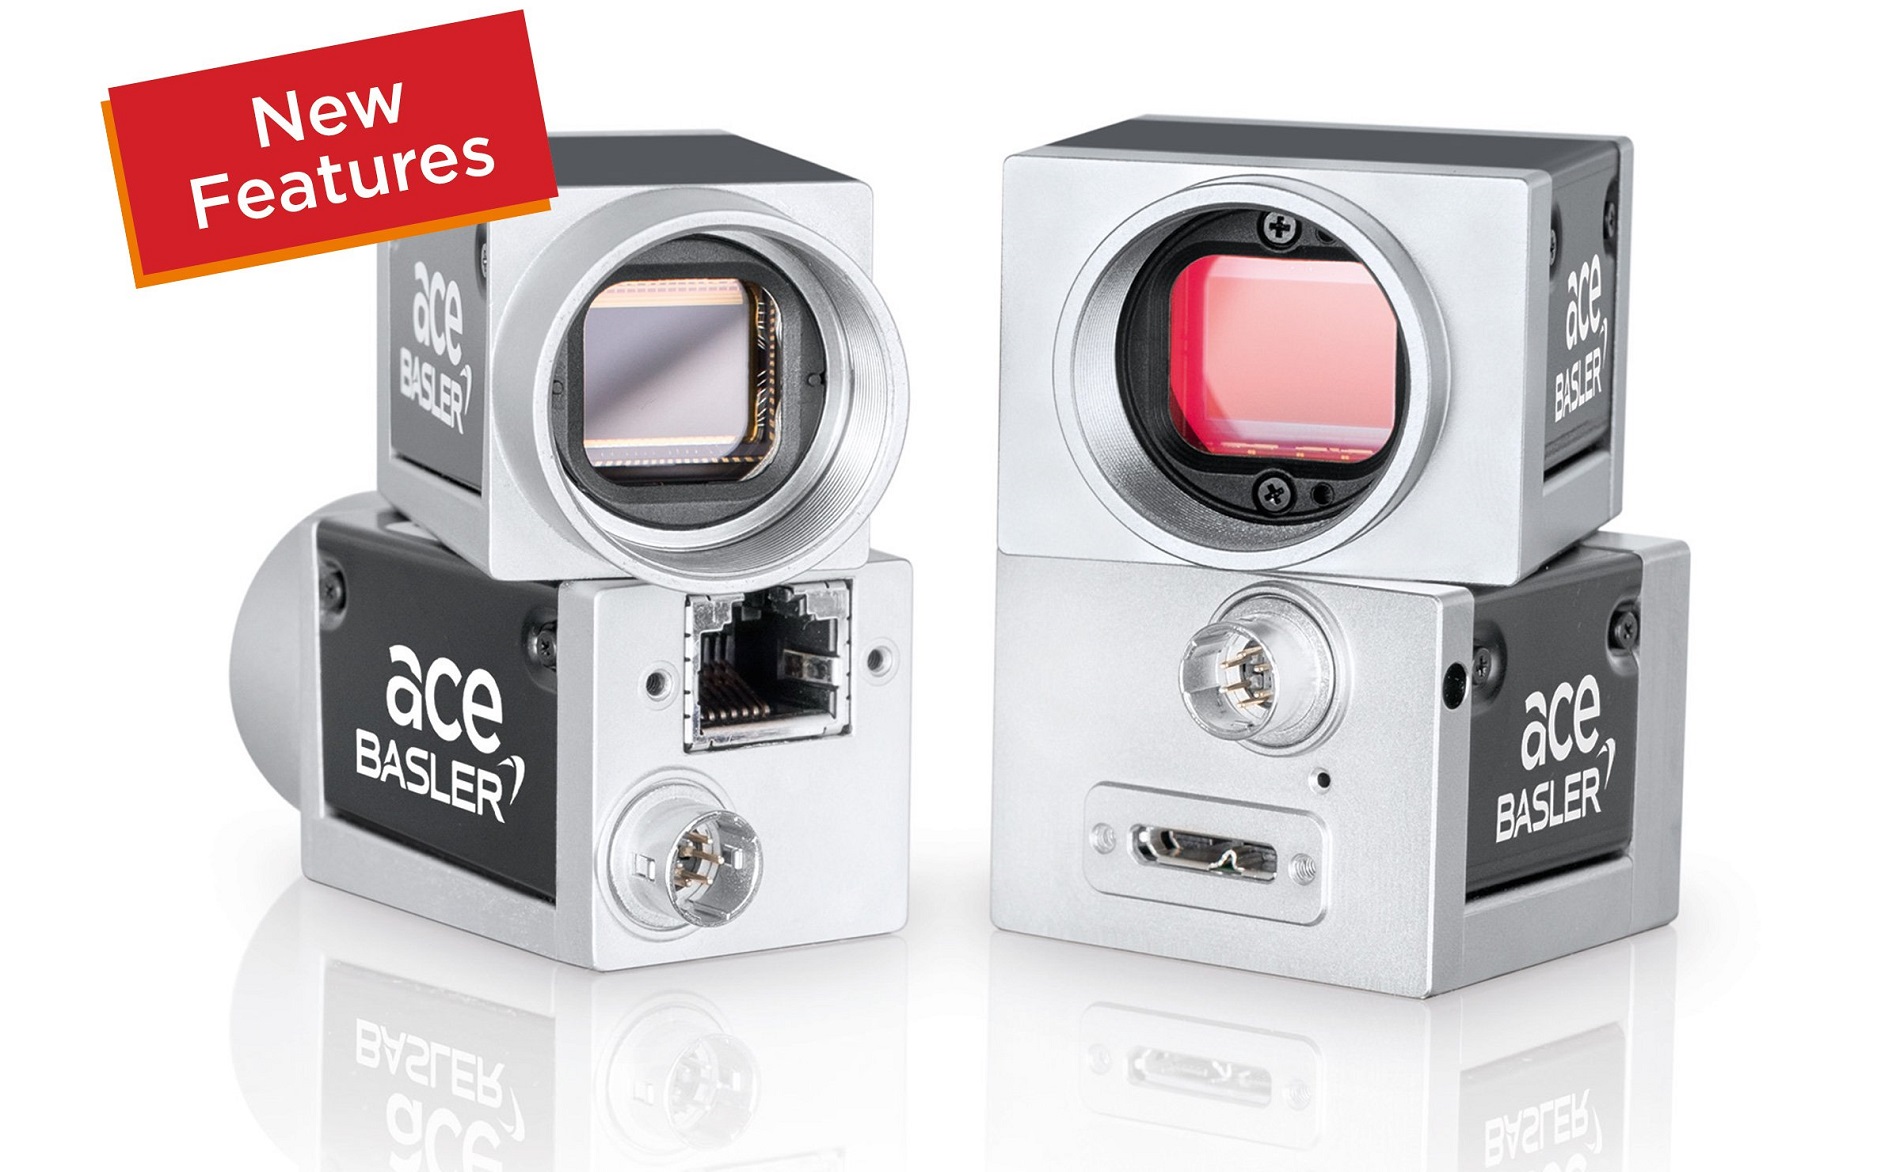 PGI for monochrome cameras and Stacked ROI are available on selected Basler ace U and ace L models.